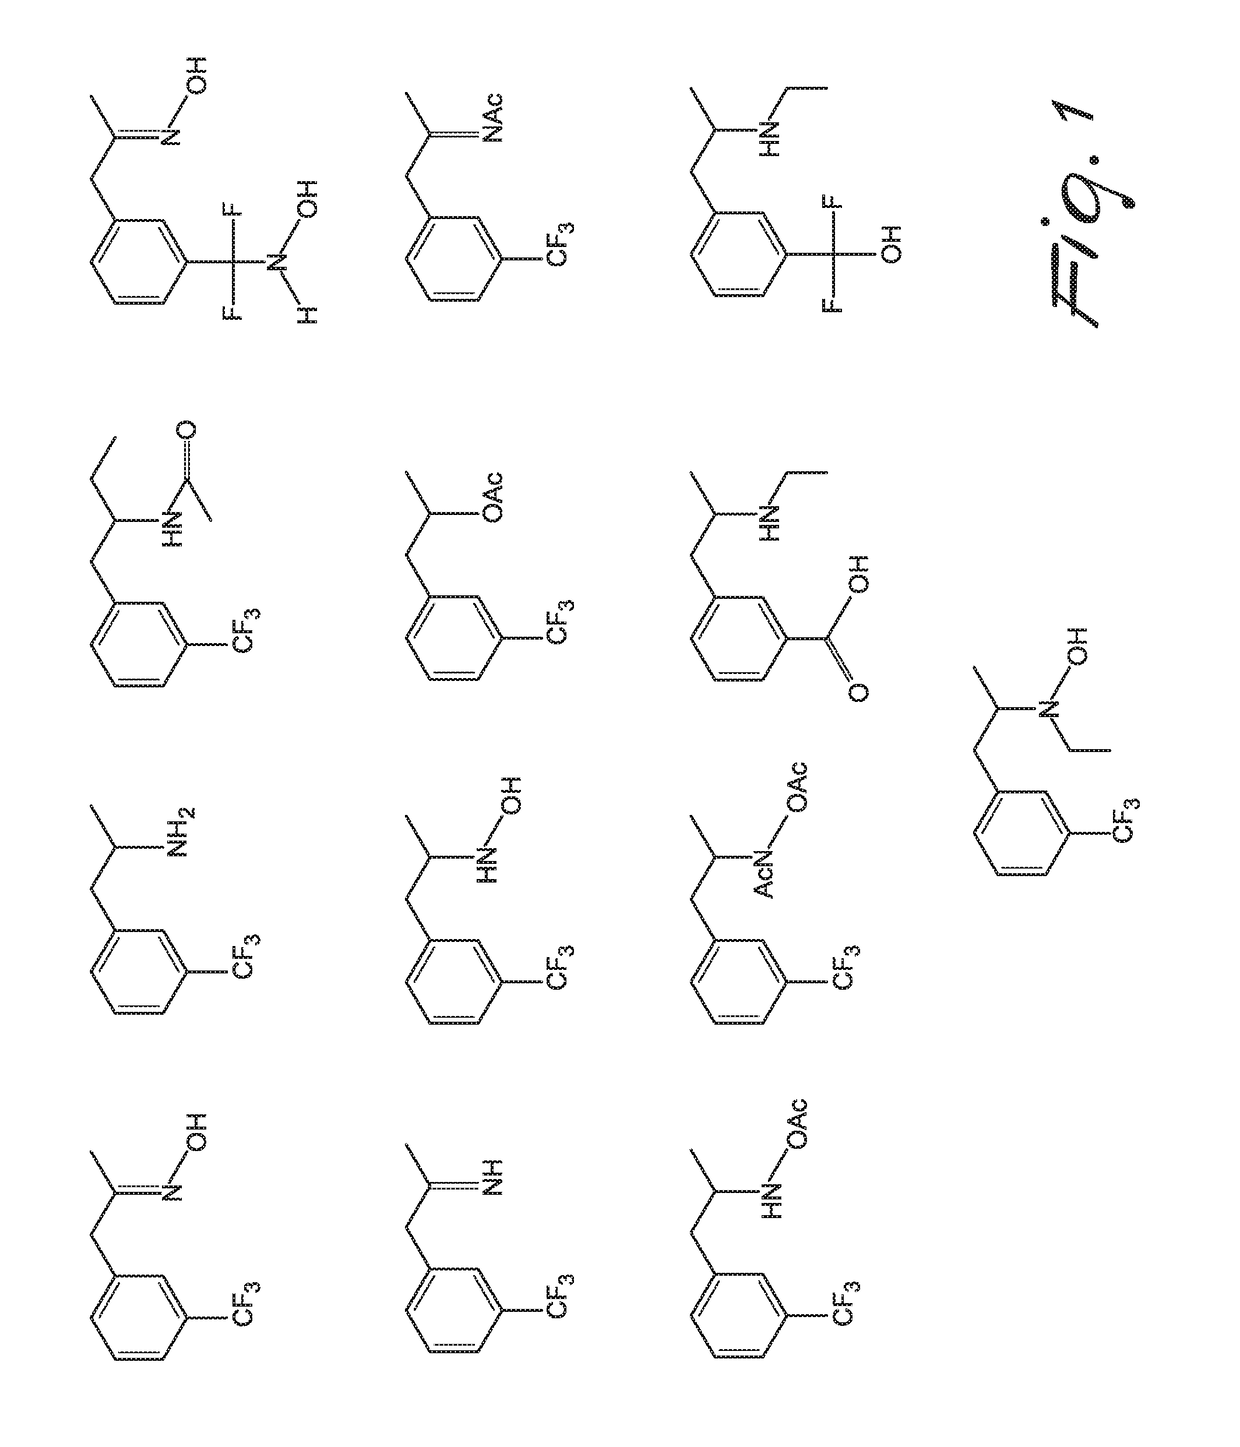 New method for synthesis of fenfluramine, and new compositions comprising it